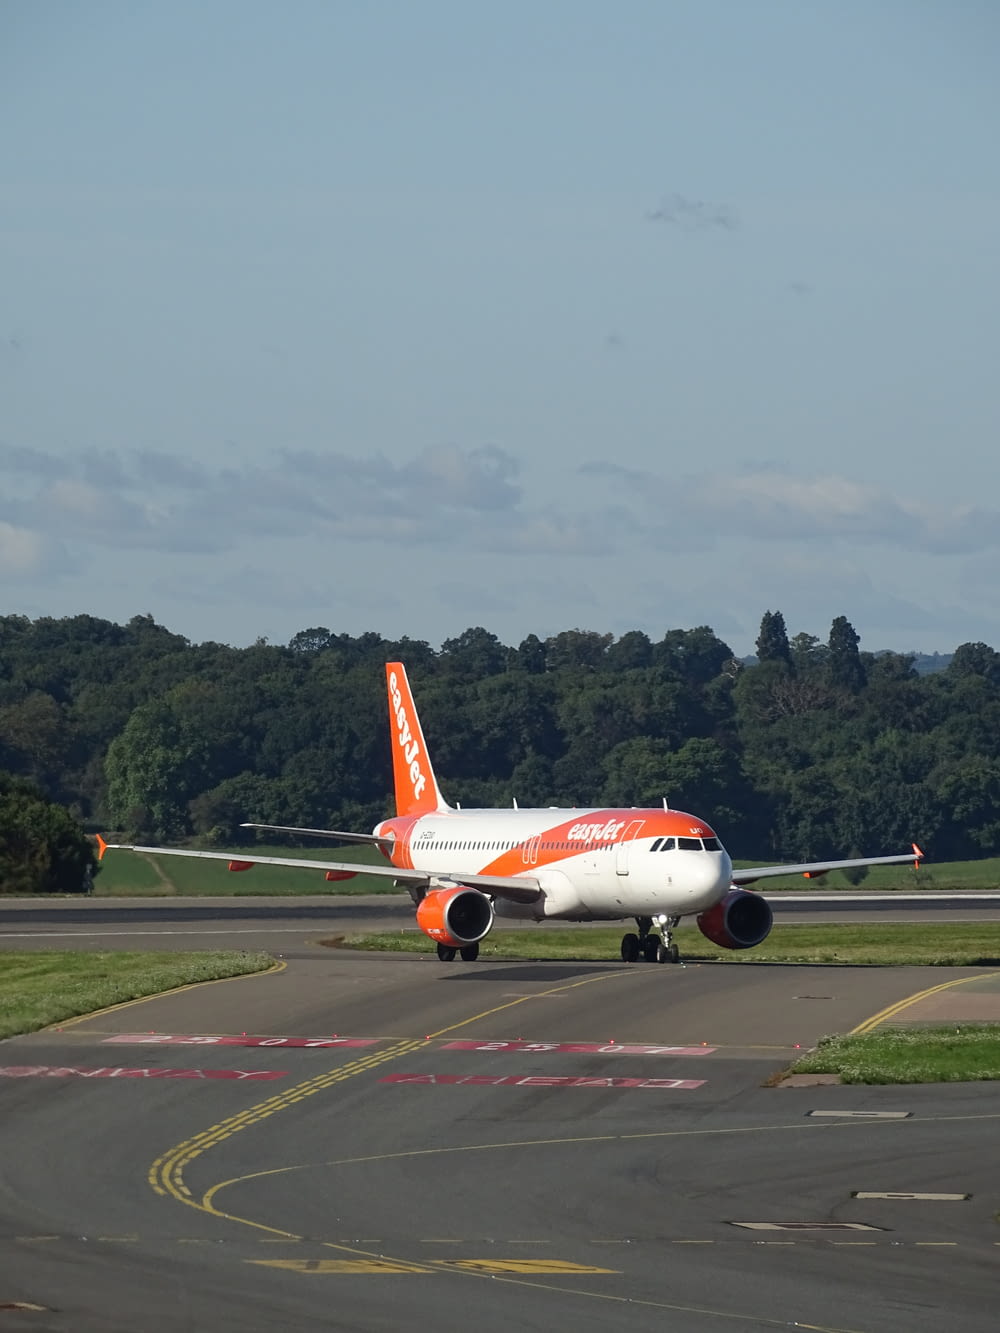 an orange and white airplane is on the runway